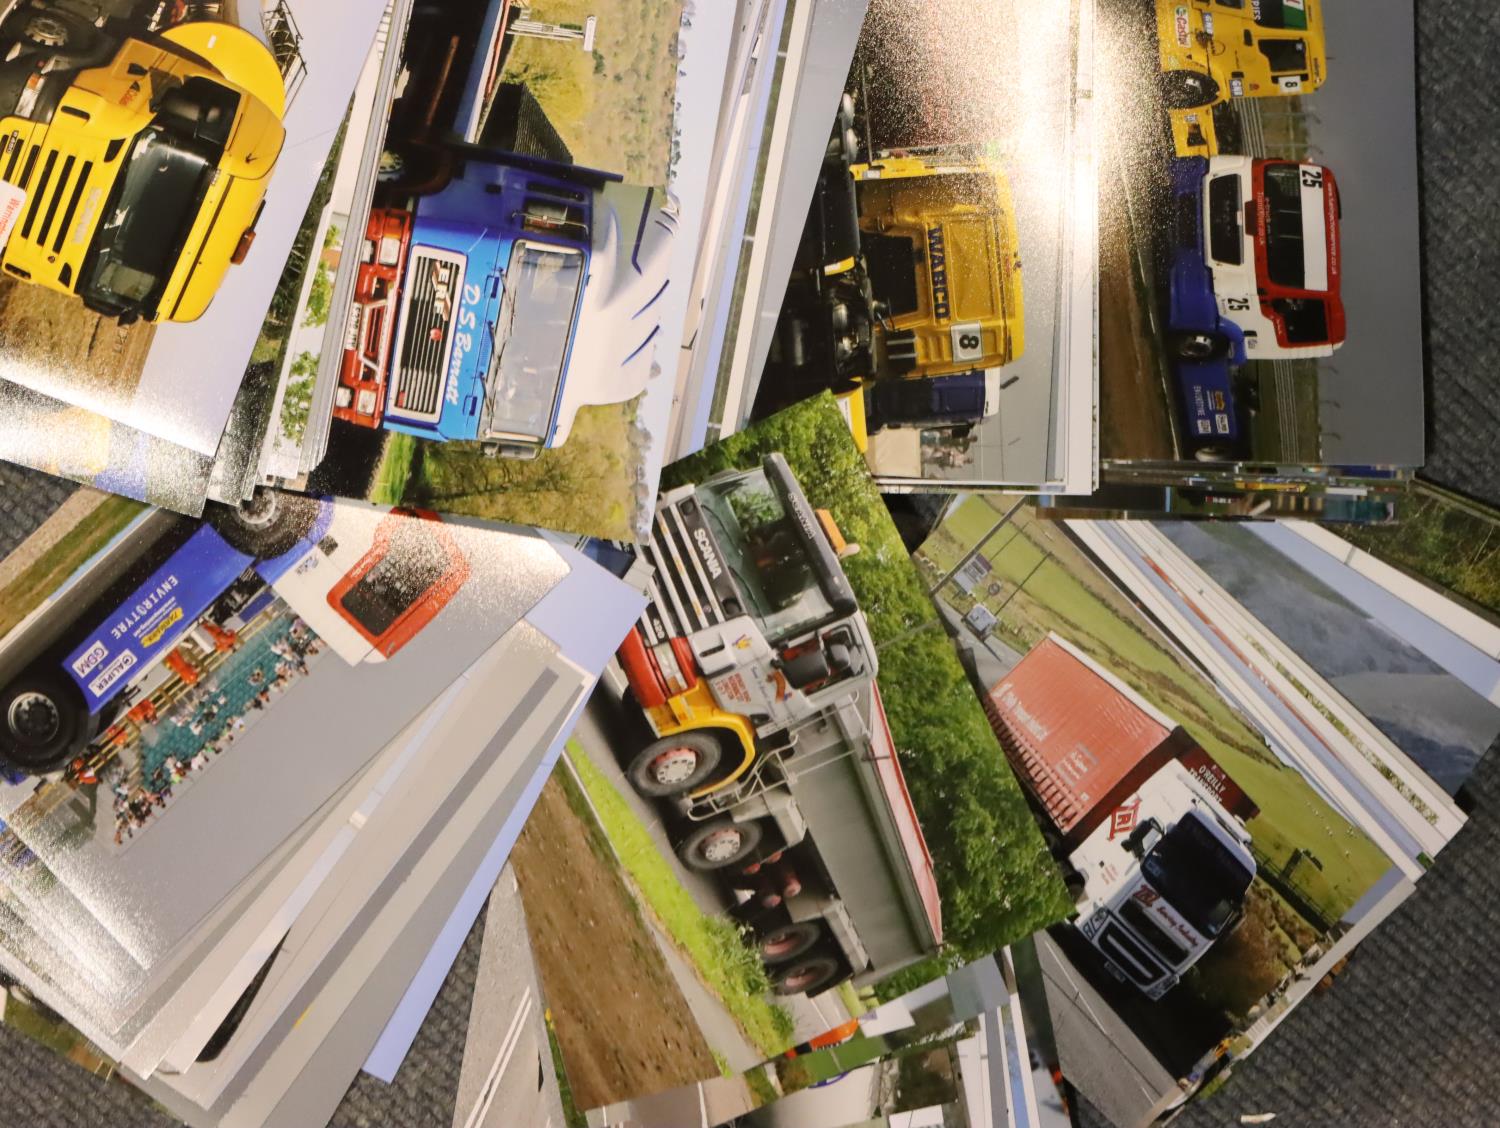 200 printed photographs of trucks, track cars and others. P&P Group 1 (£14+VAT for the first lot and